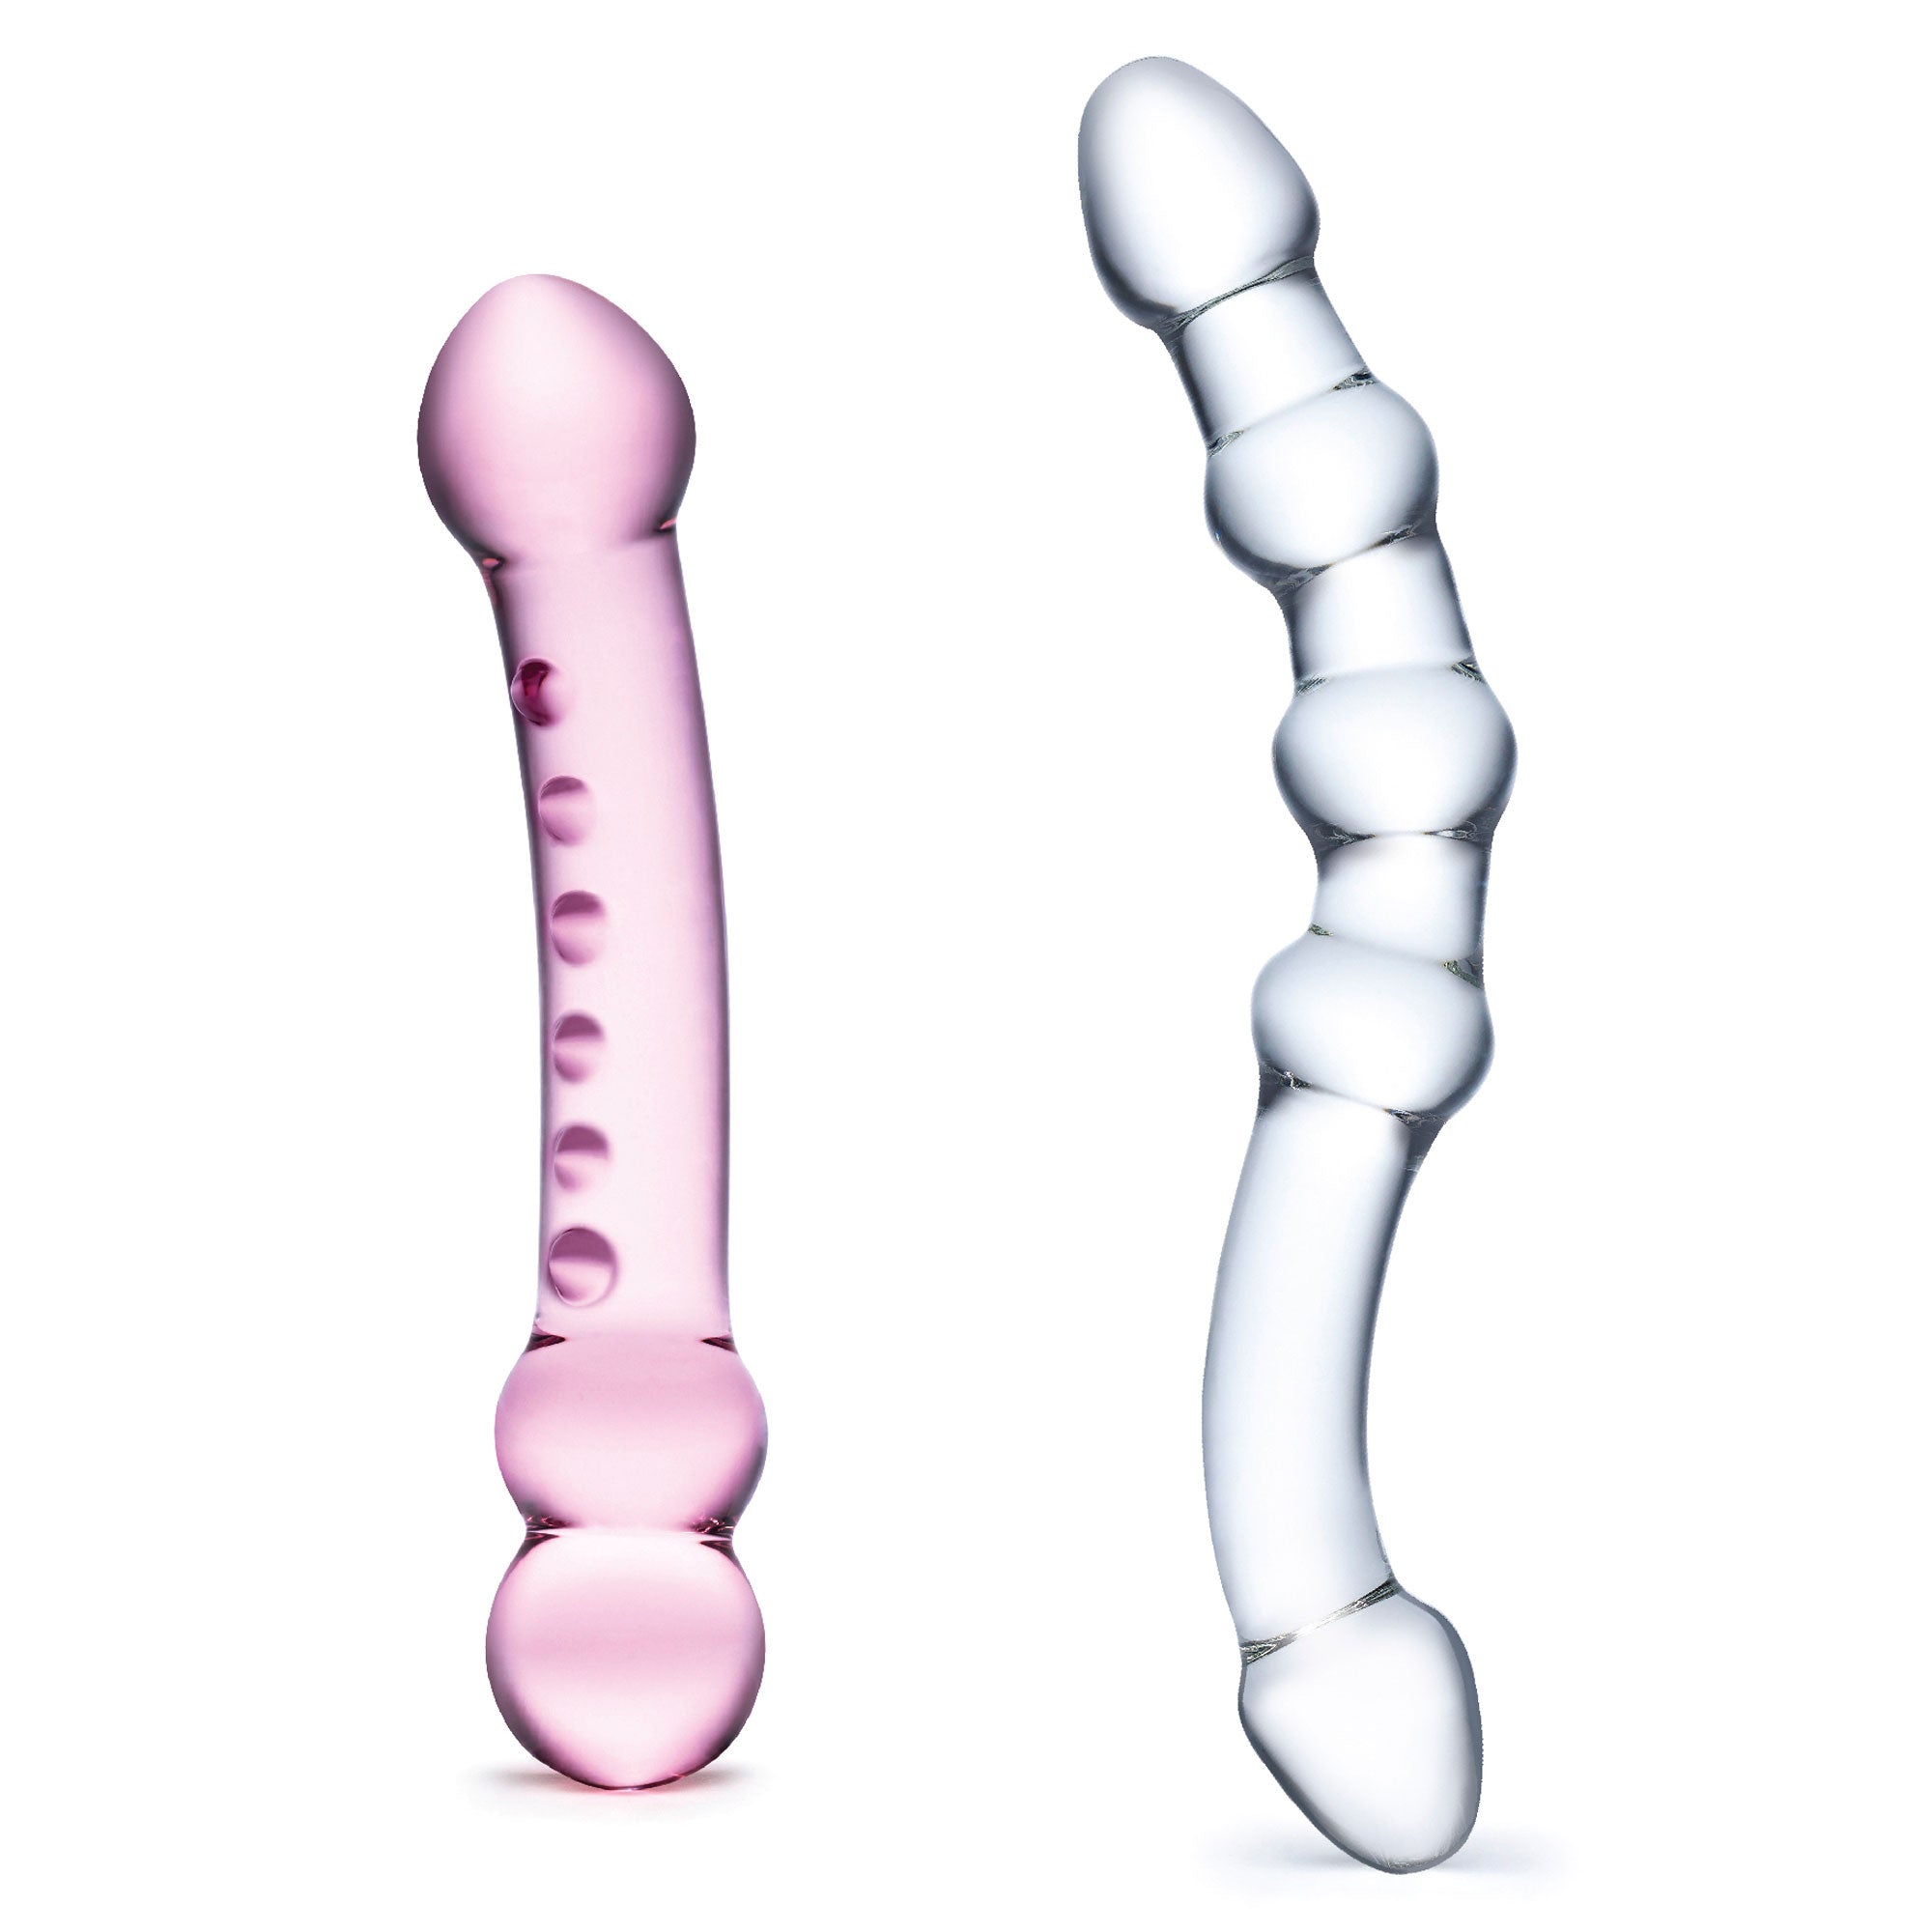 2 Pc Double Pleasure Glass Dildo Set in Pink/Clear by Glas